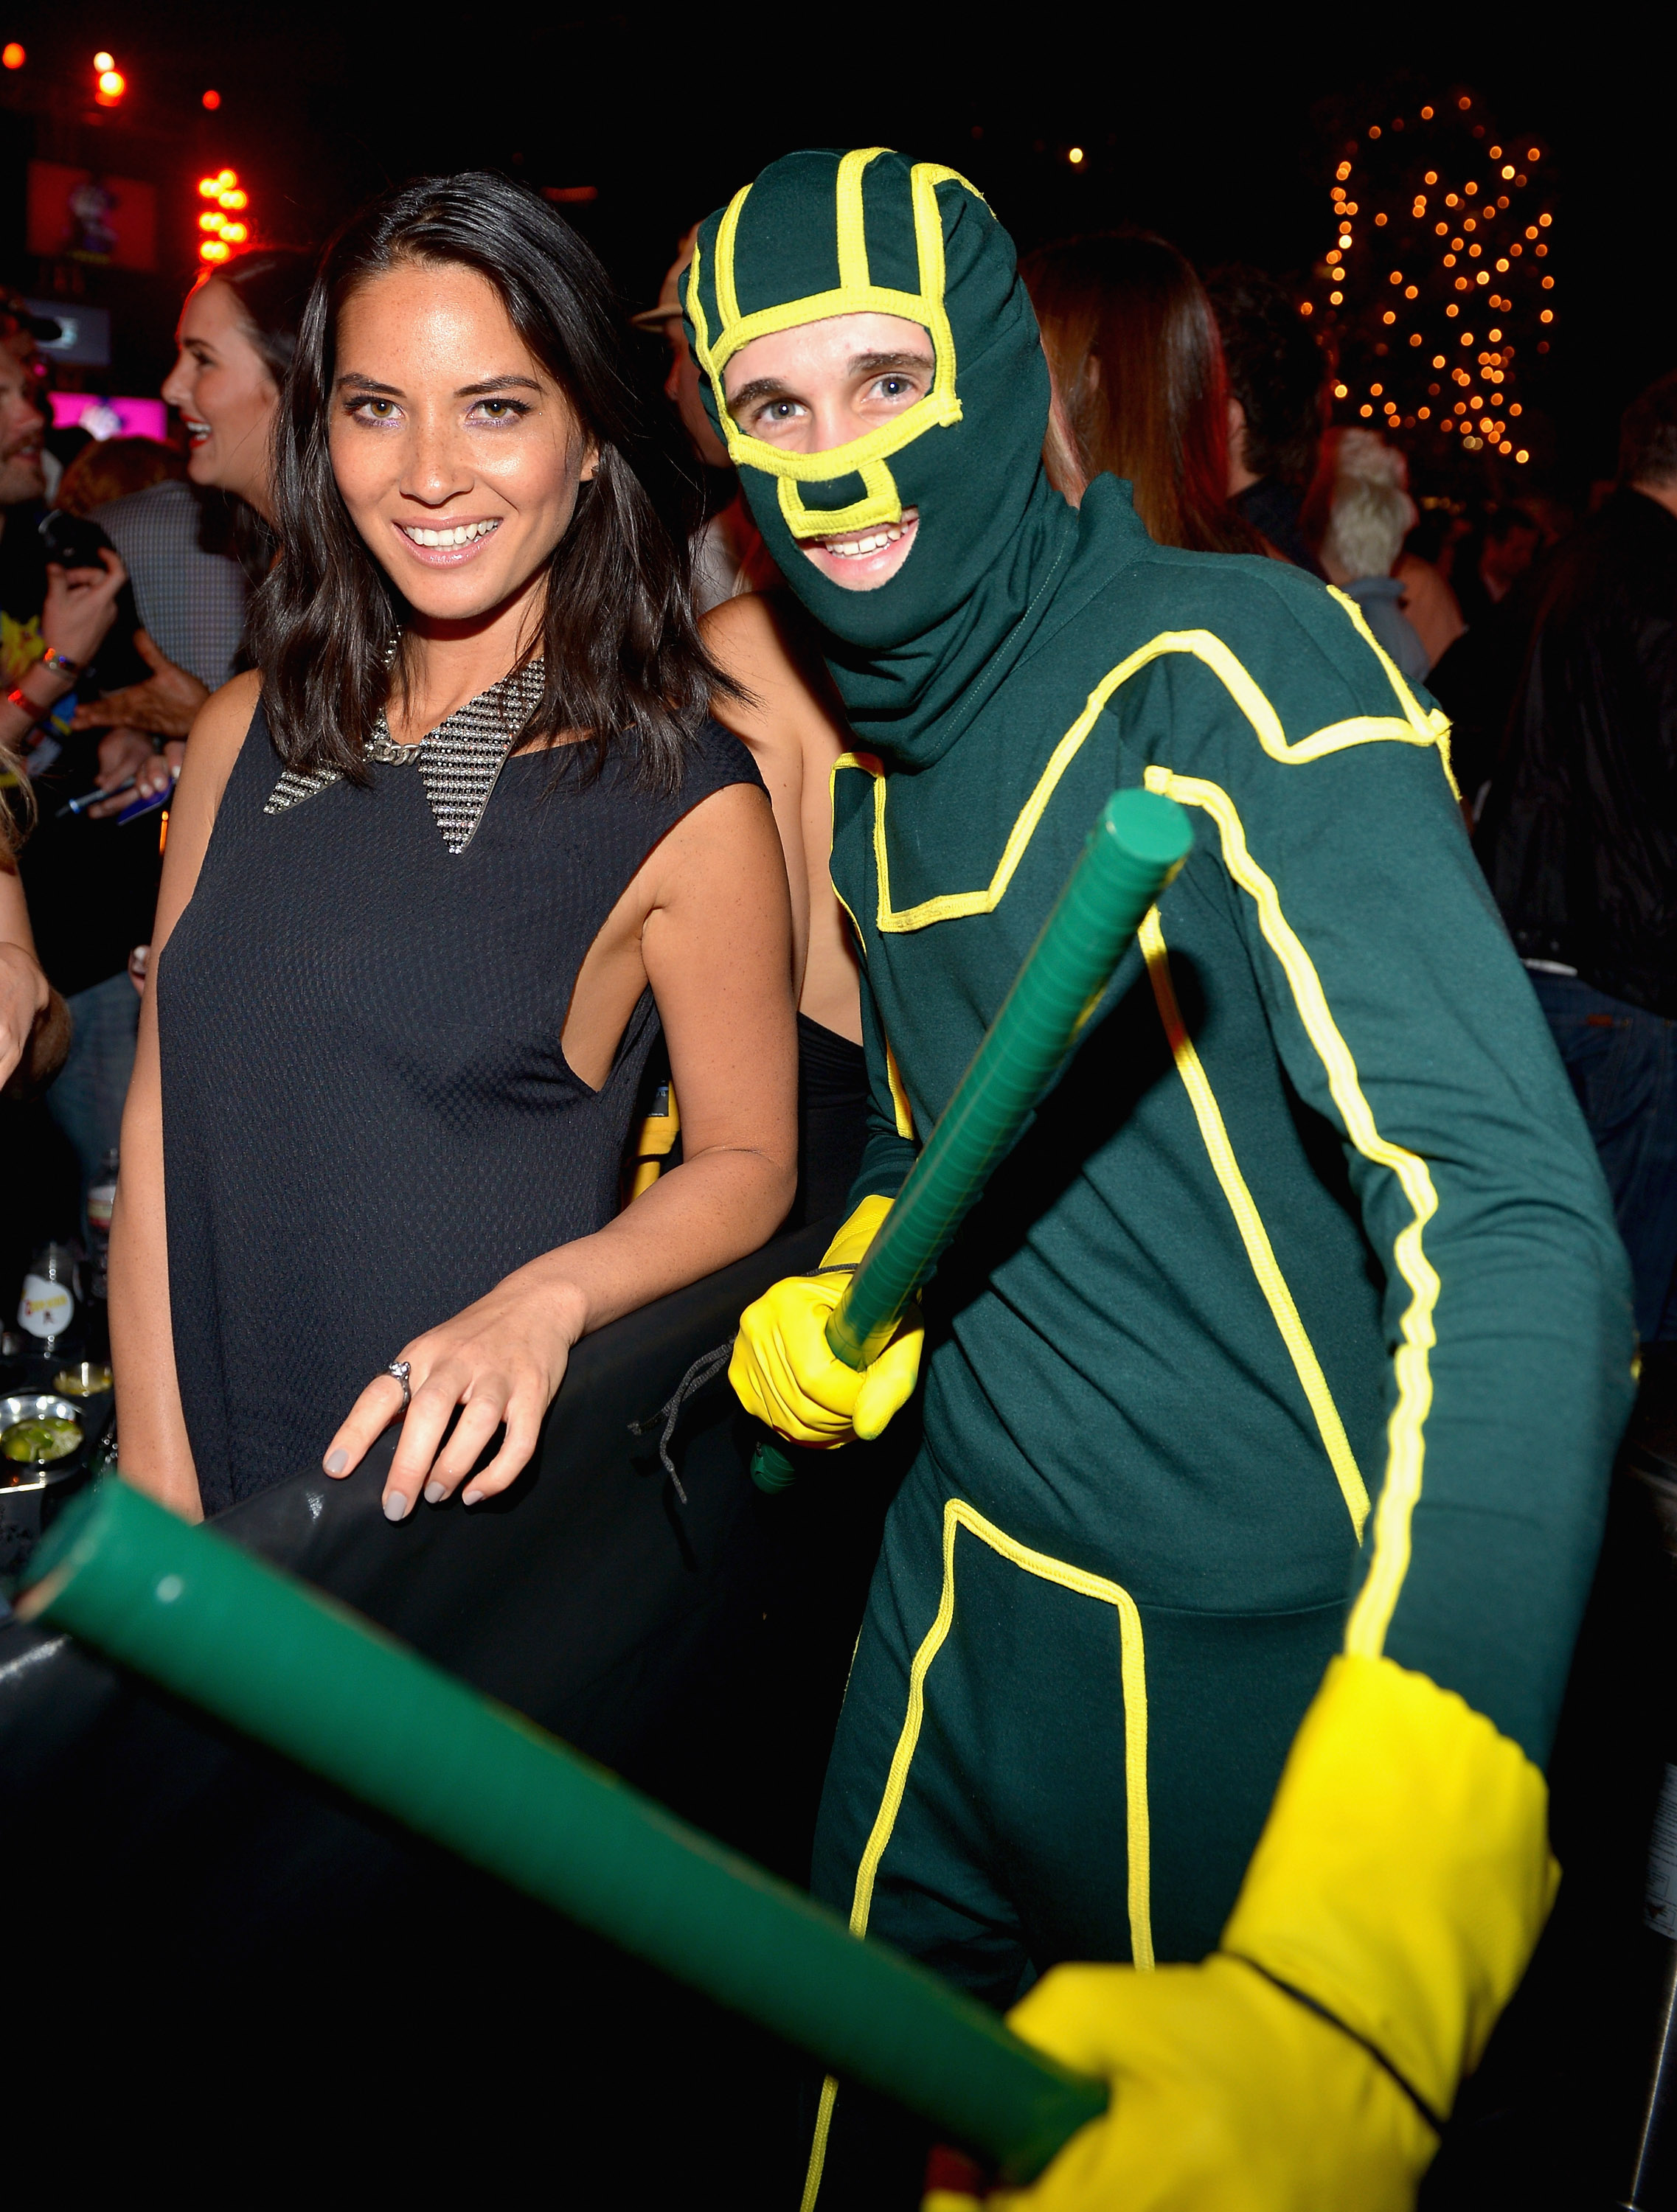 Playboy And Universal Pictures' "Kick-Ass 2" Event At Comic-Con Sponsored By AXE Black Chill - (Photo by Charley Gallay/Getty Images for Playboy)